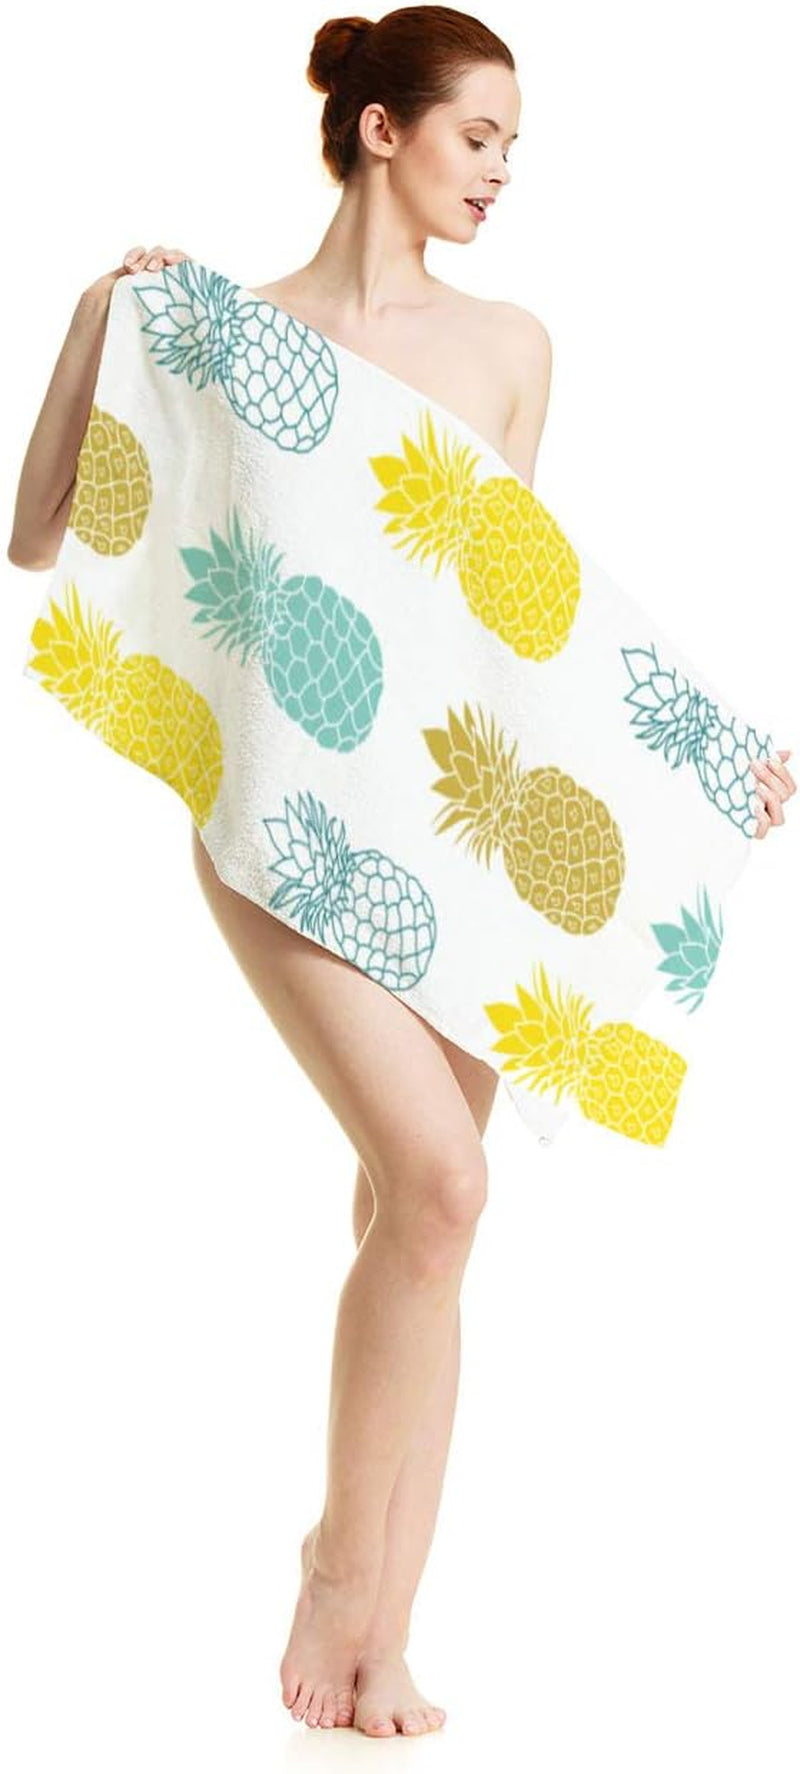 Pineapple Fruit Hand Towels Cotton Washcloths,Fresh Tropical Summer Botanical Pineapples Blue Yellow Comfortable Super-Absorbent Soft Towels for Bathroom Kitchen Spa Gym Yoga Towel 15X30 Inch